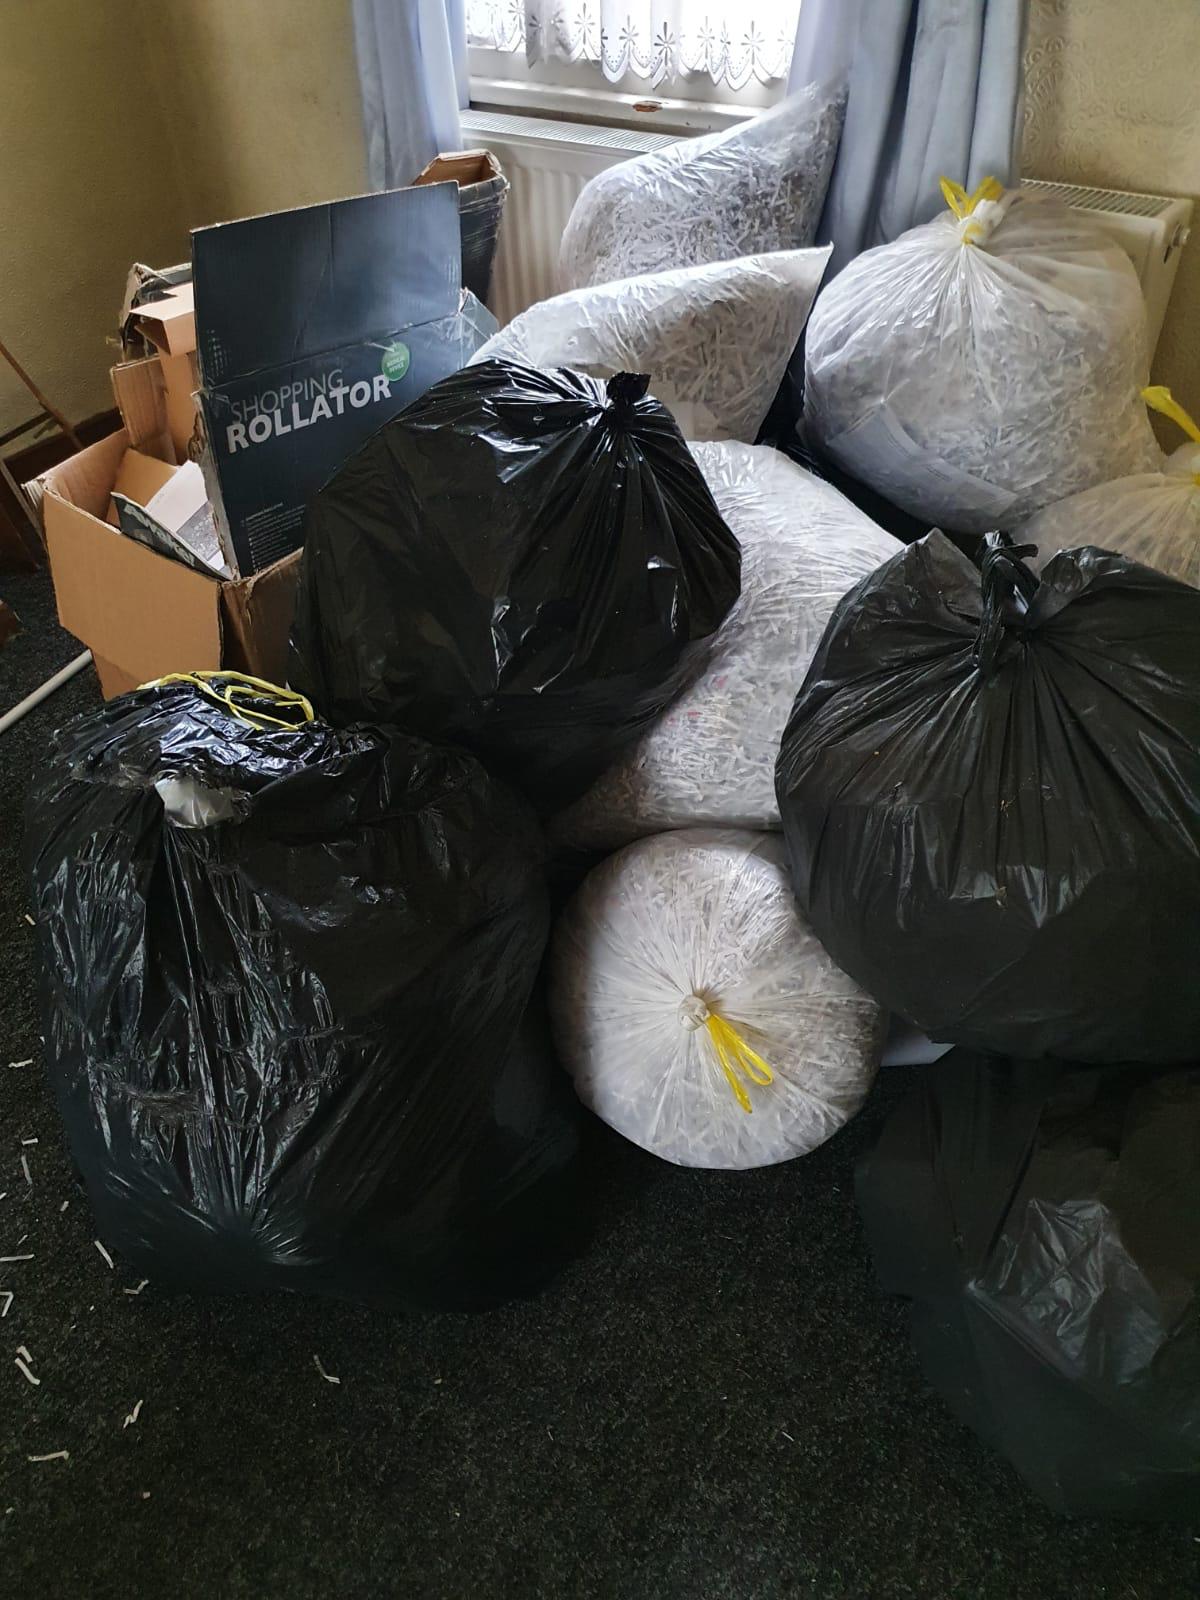 domestic junk collection in plastic bags